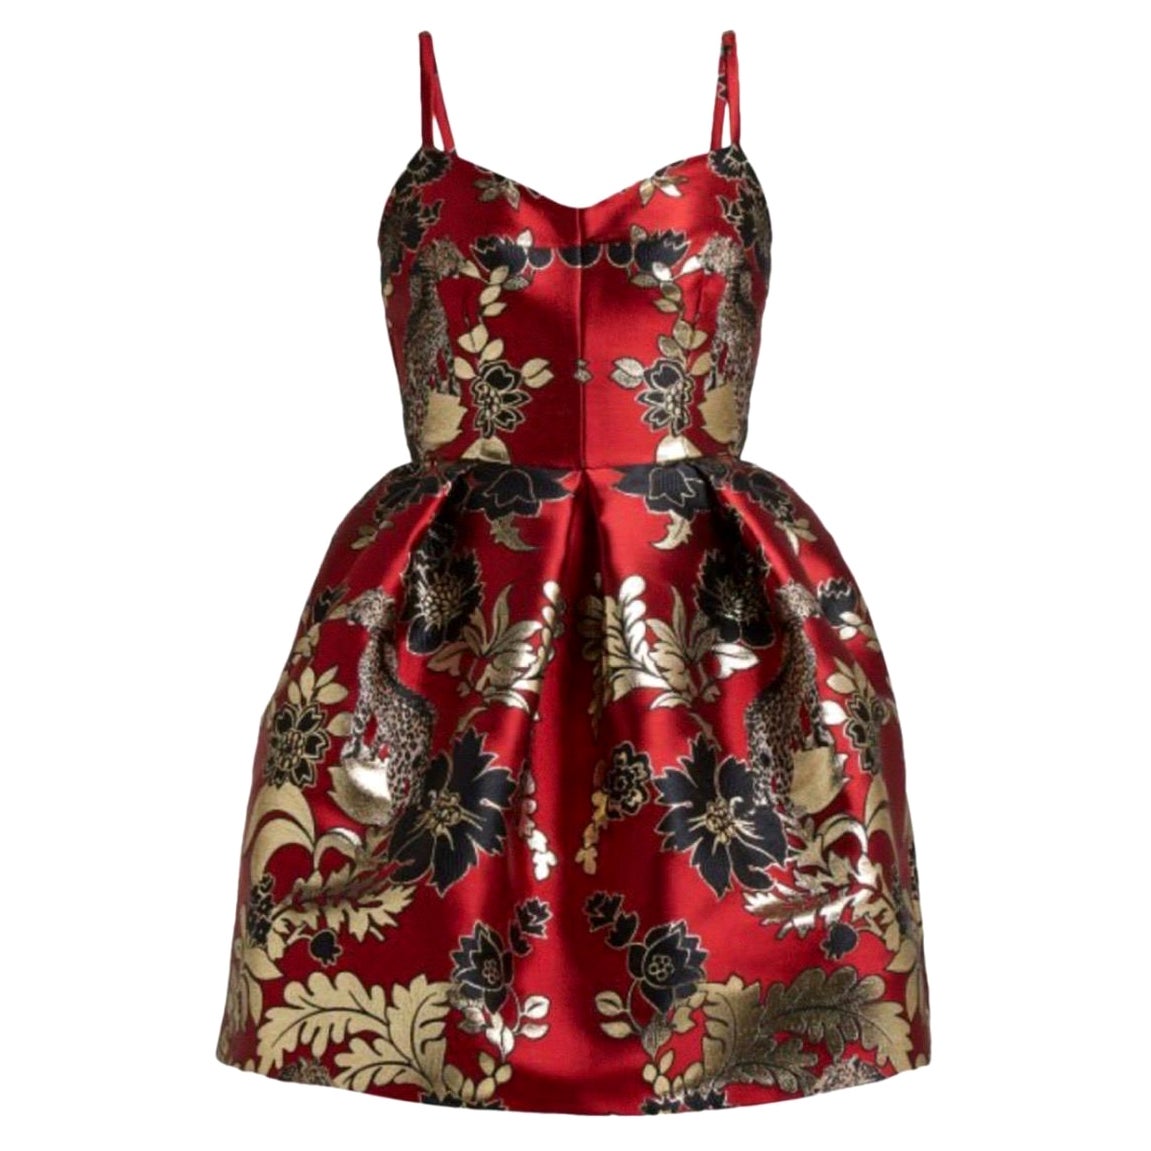 Dolce and Gabbana red and gold, floral and leopard brocade mini dress